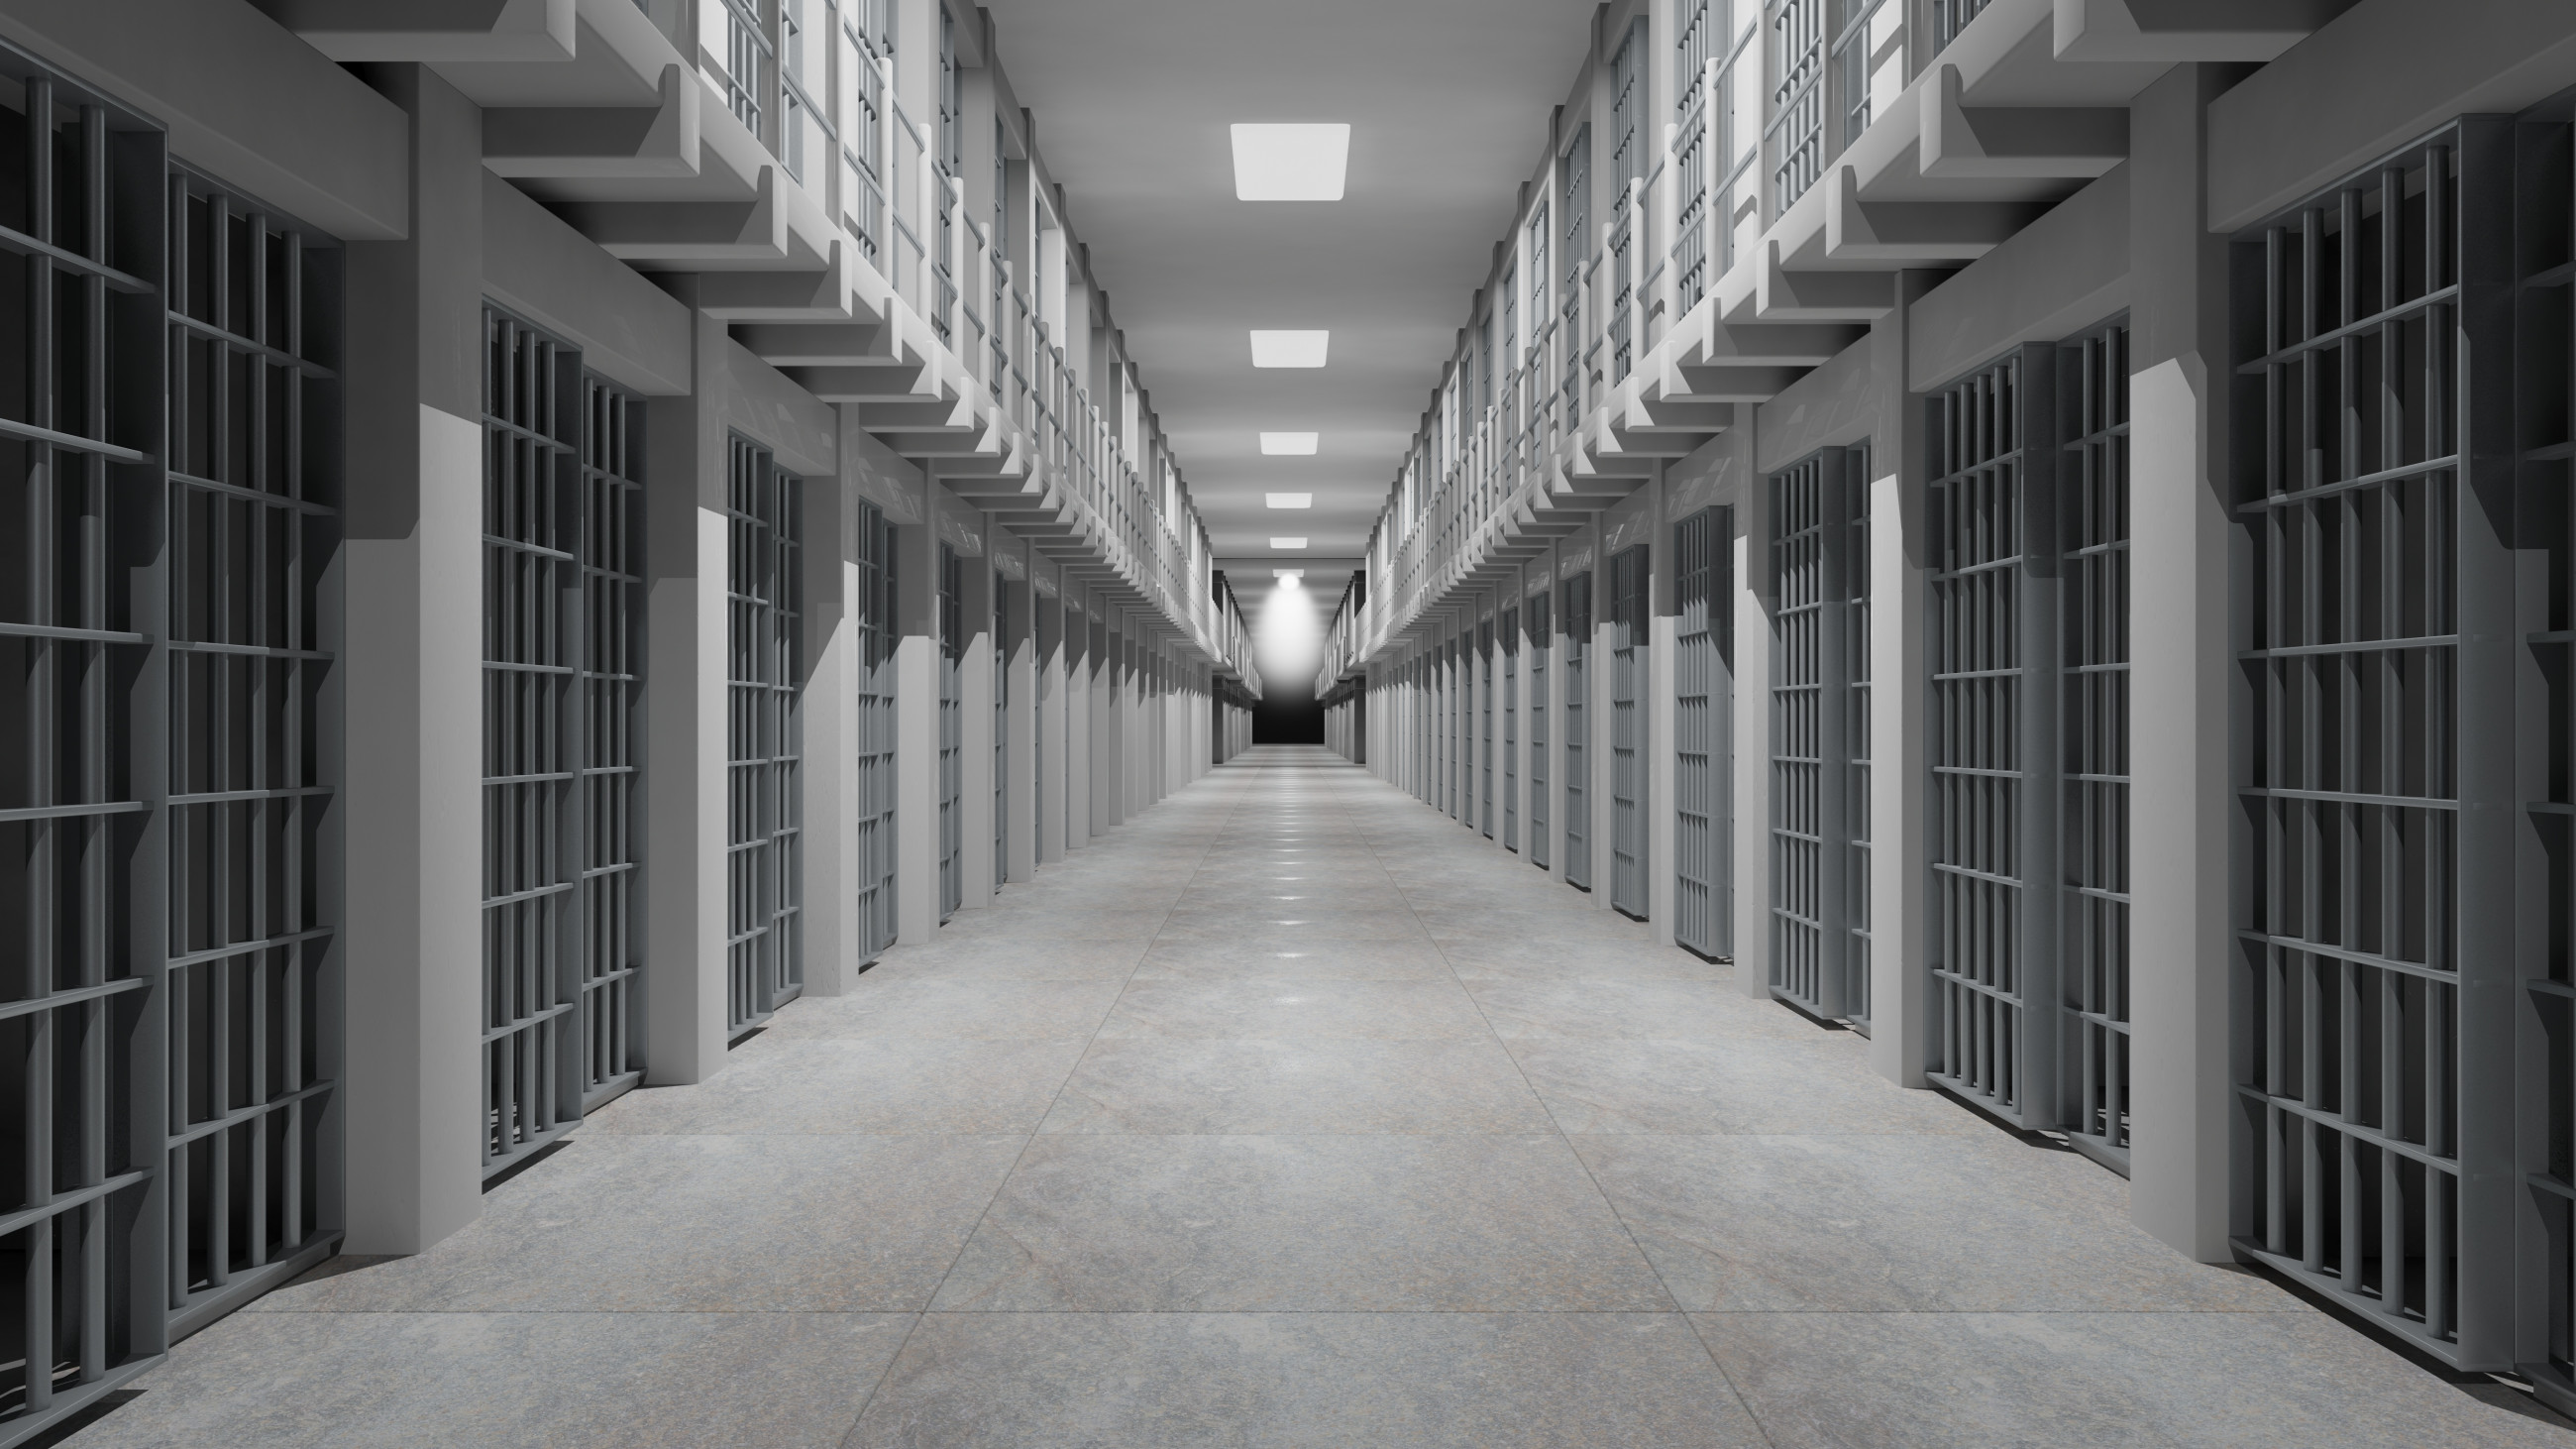 Interior of a prison corridor with visible cell bars on the sides